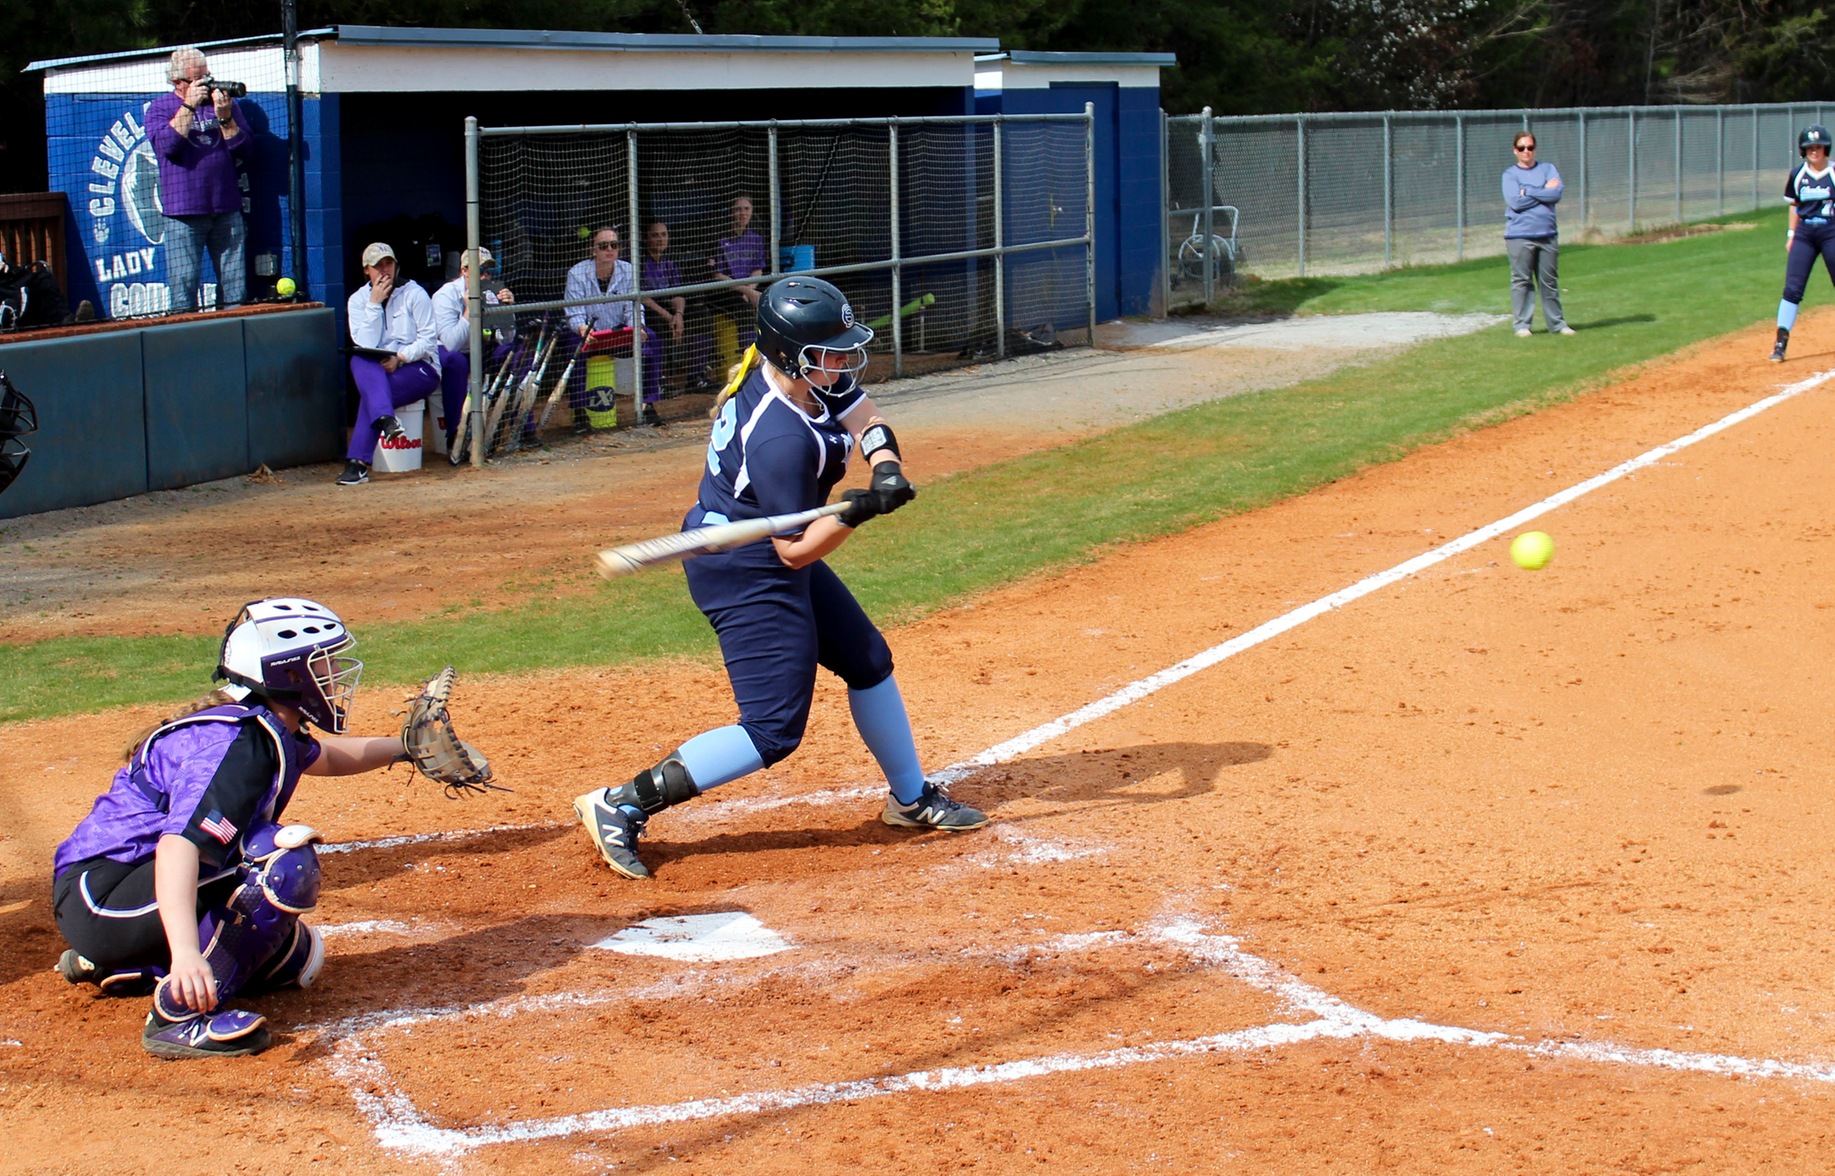 PREVIEW: Softball Returns Home to Play Motlow State